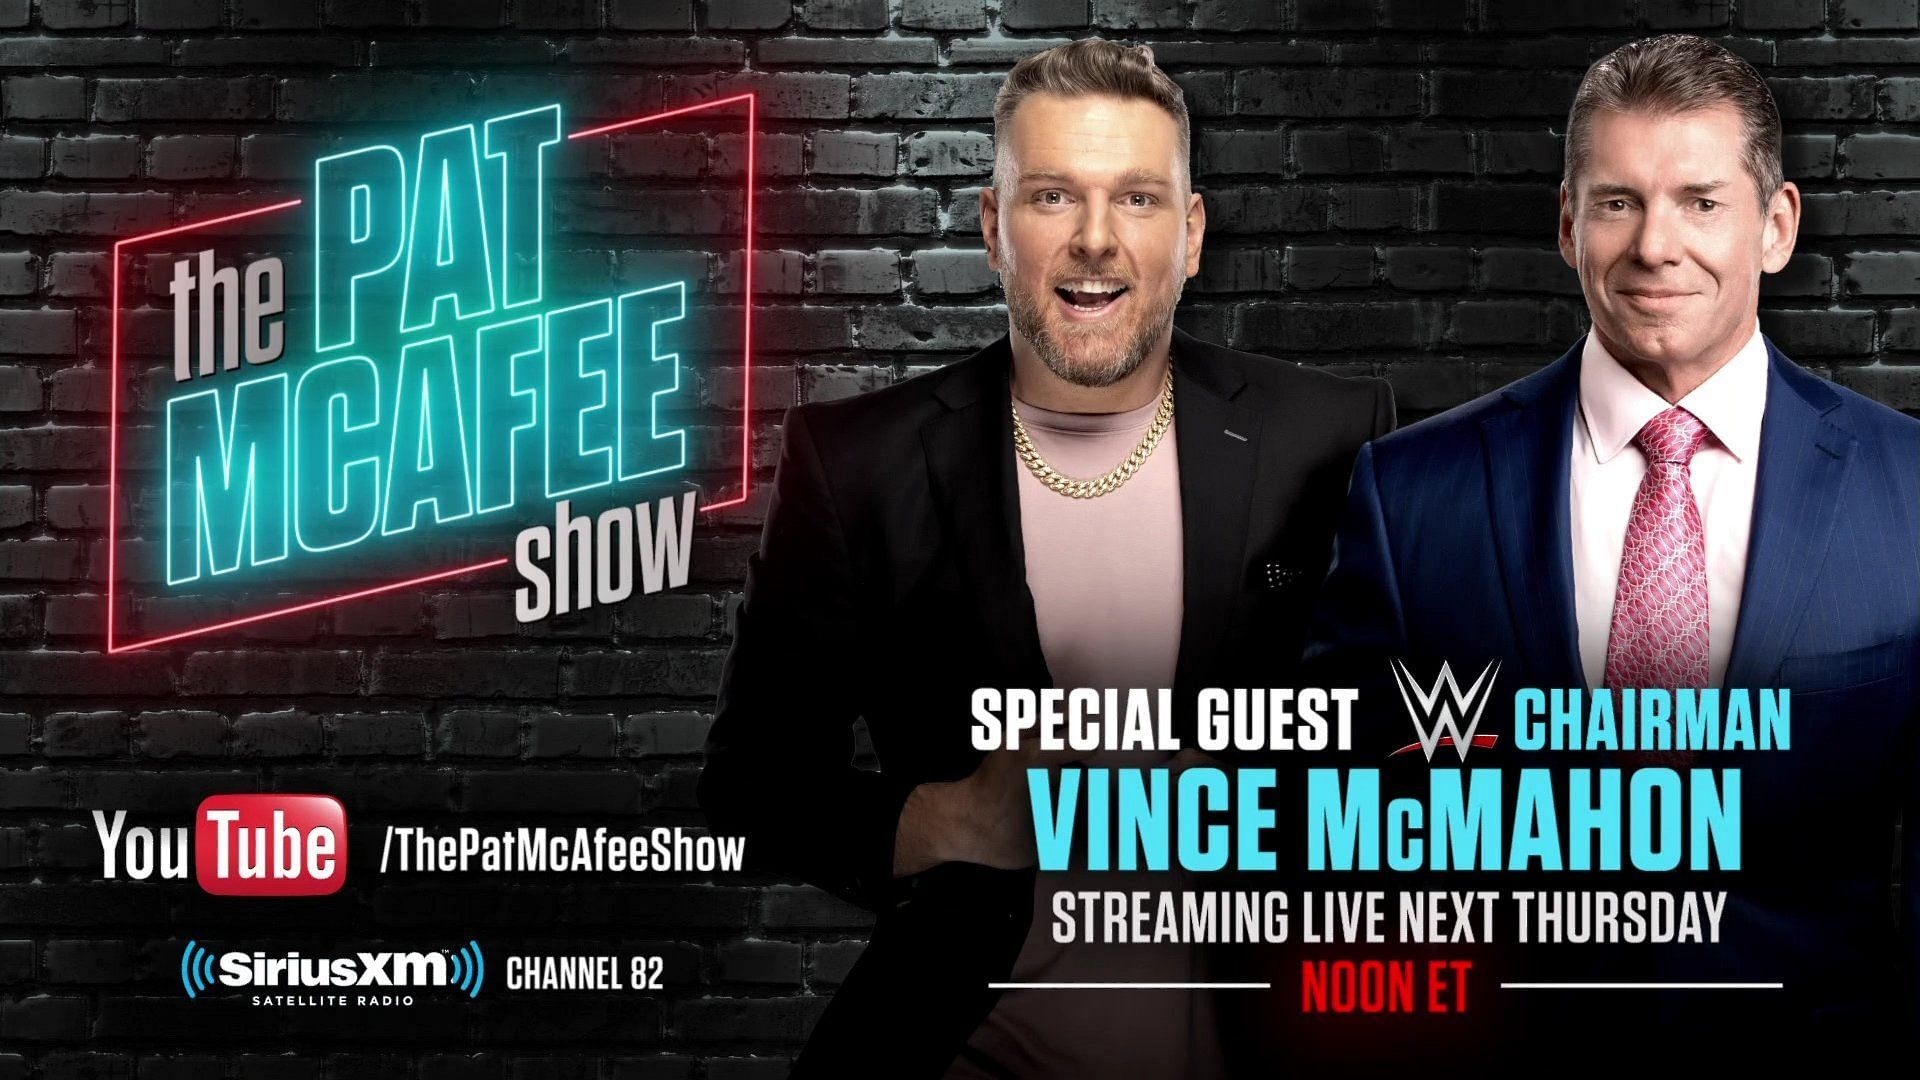 Vince McMahon joined WWE SmackDown commentator Pat McAfee on The Pat McAfee Show.